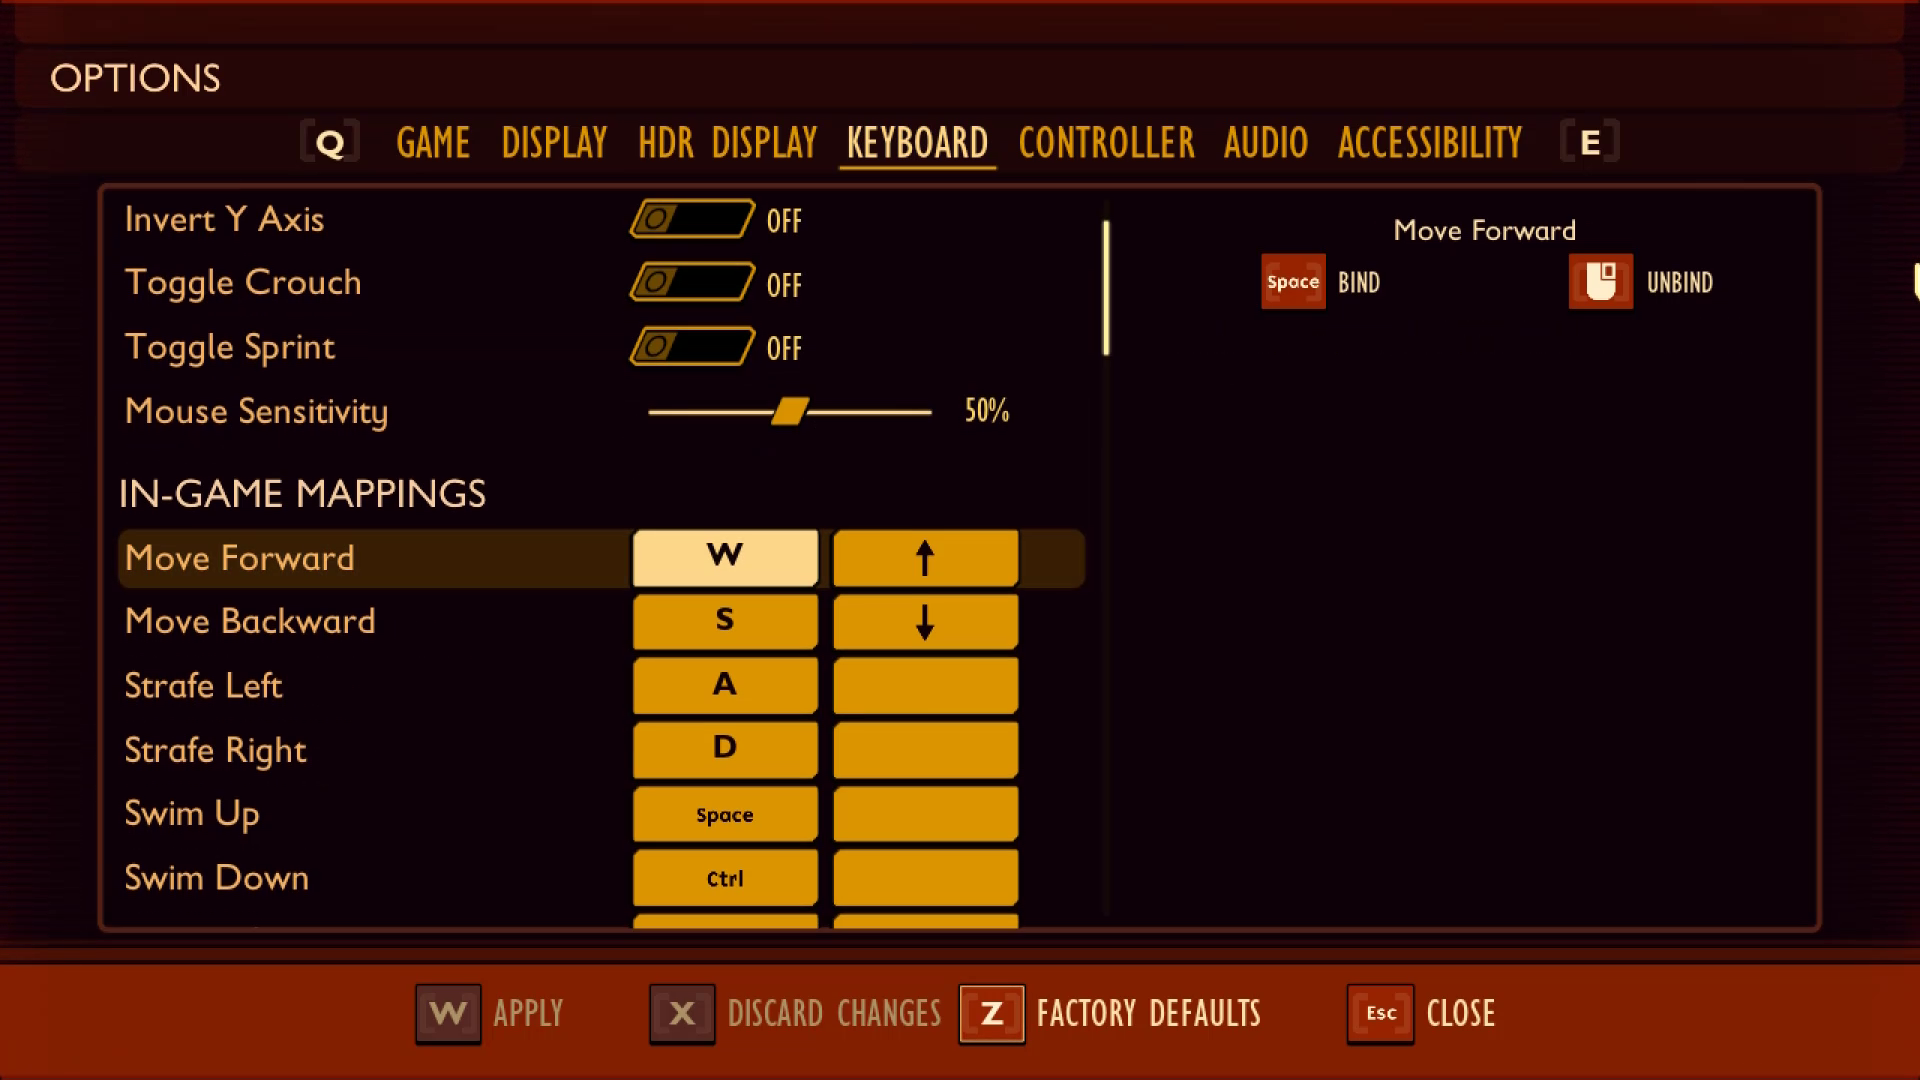 A screenshot from Grounded on PC, showing the keyboard remapping options UI.